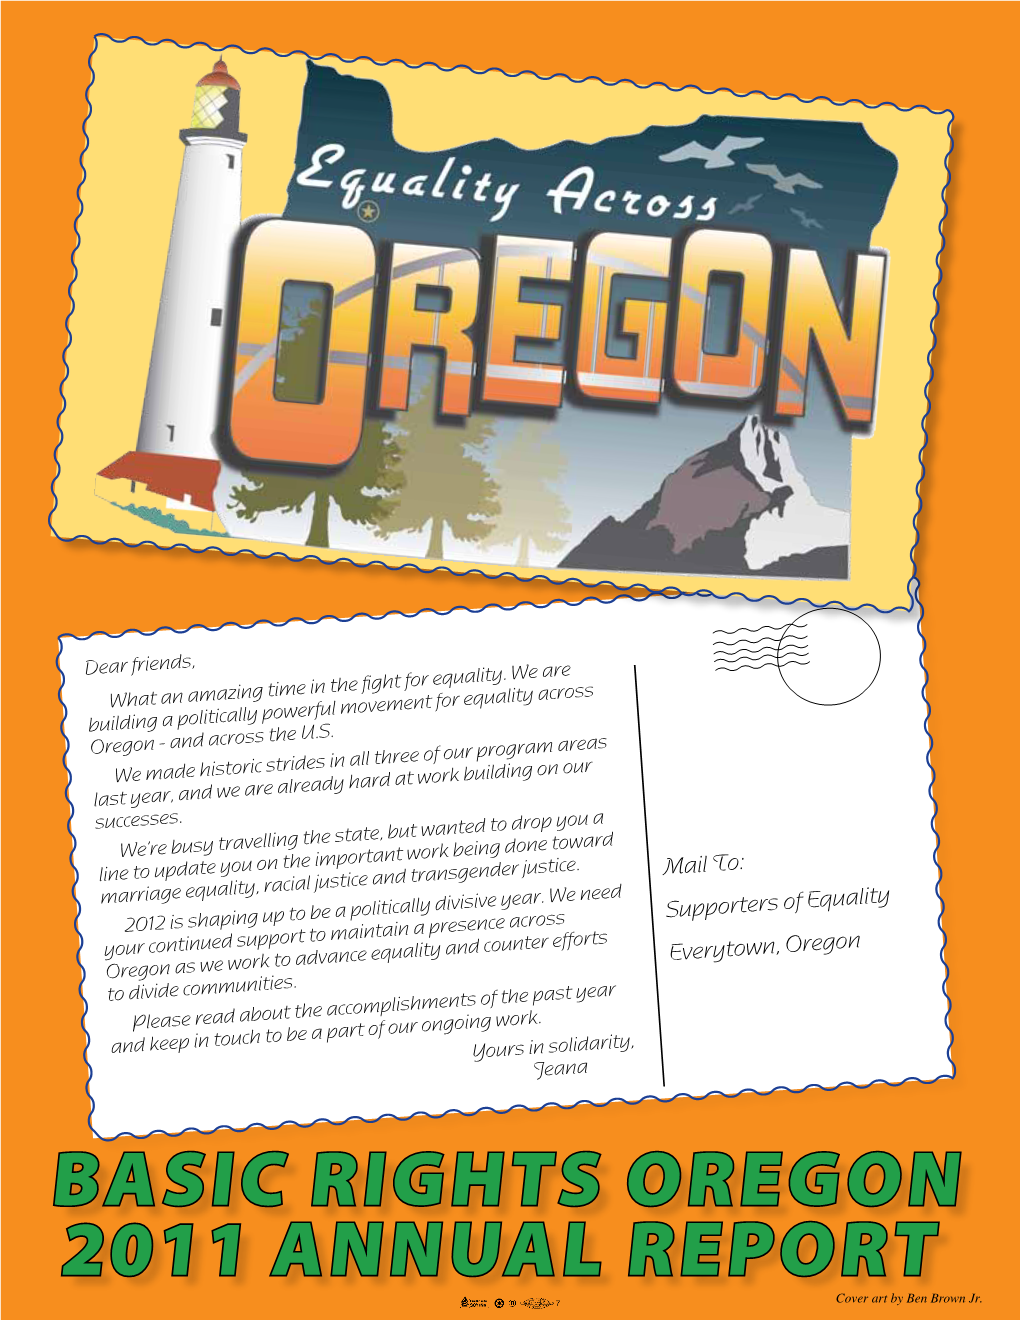 Basic Rights Oregon 2011 Annual Report Cover Art by Ben Brown Jr